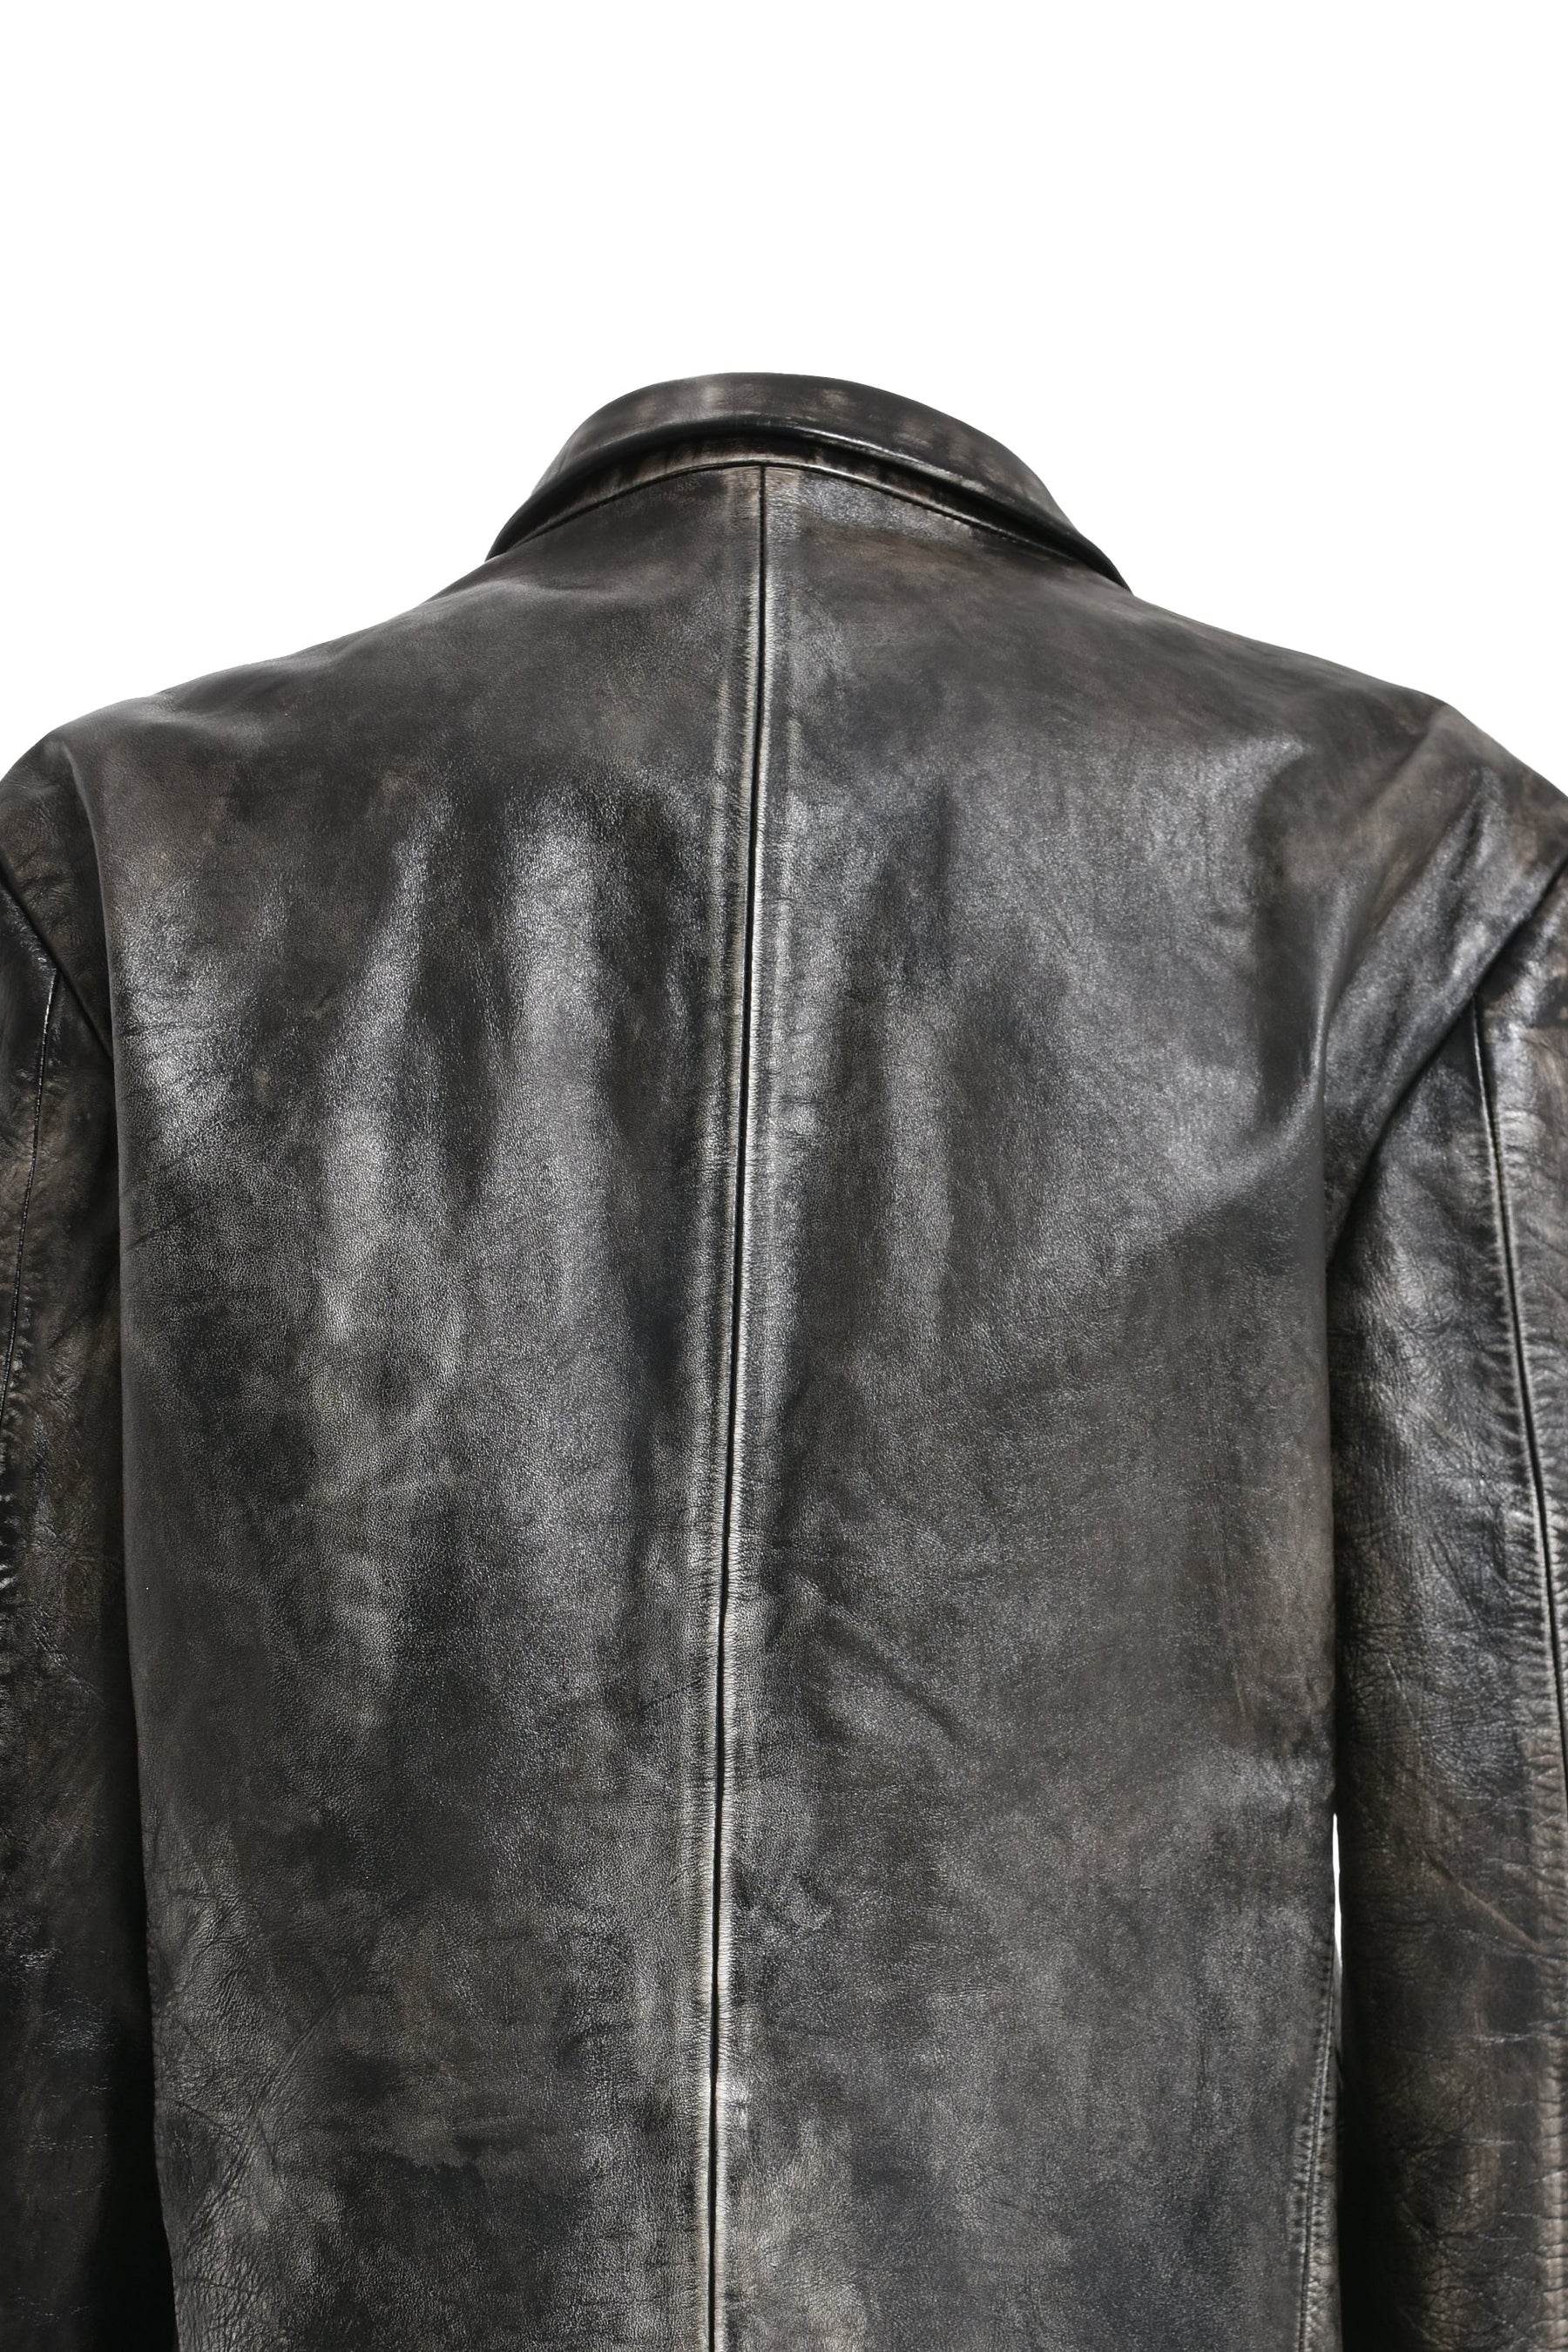 READYMADE LEATHER JACKET / BLK